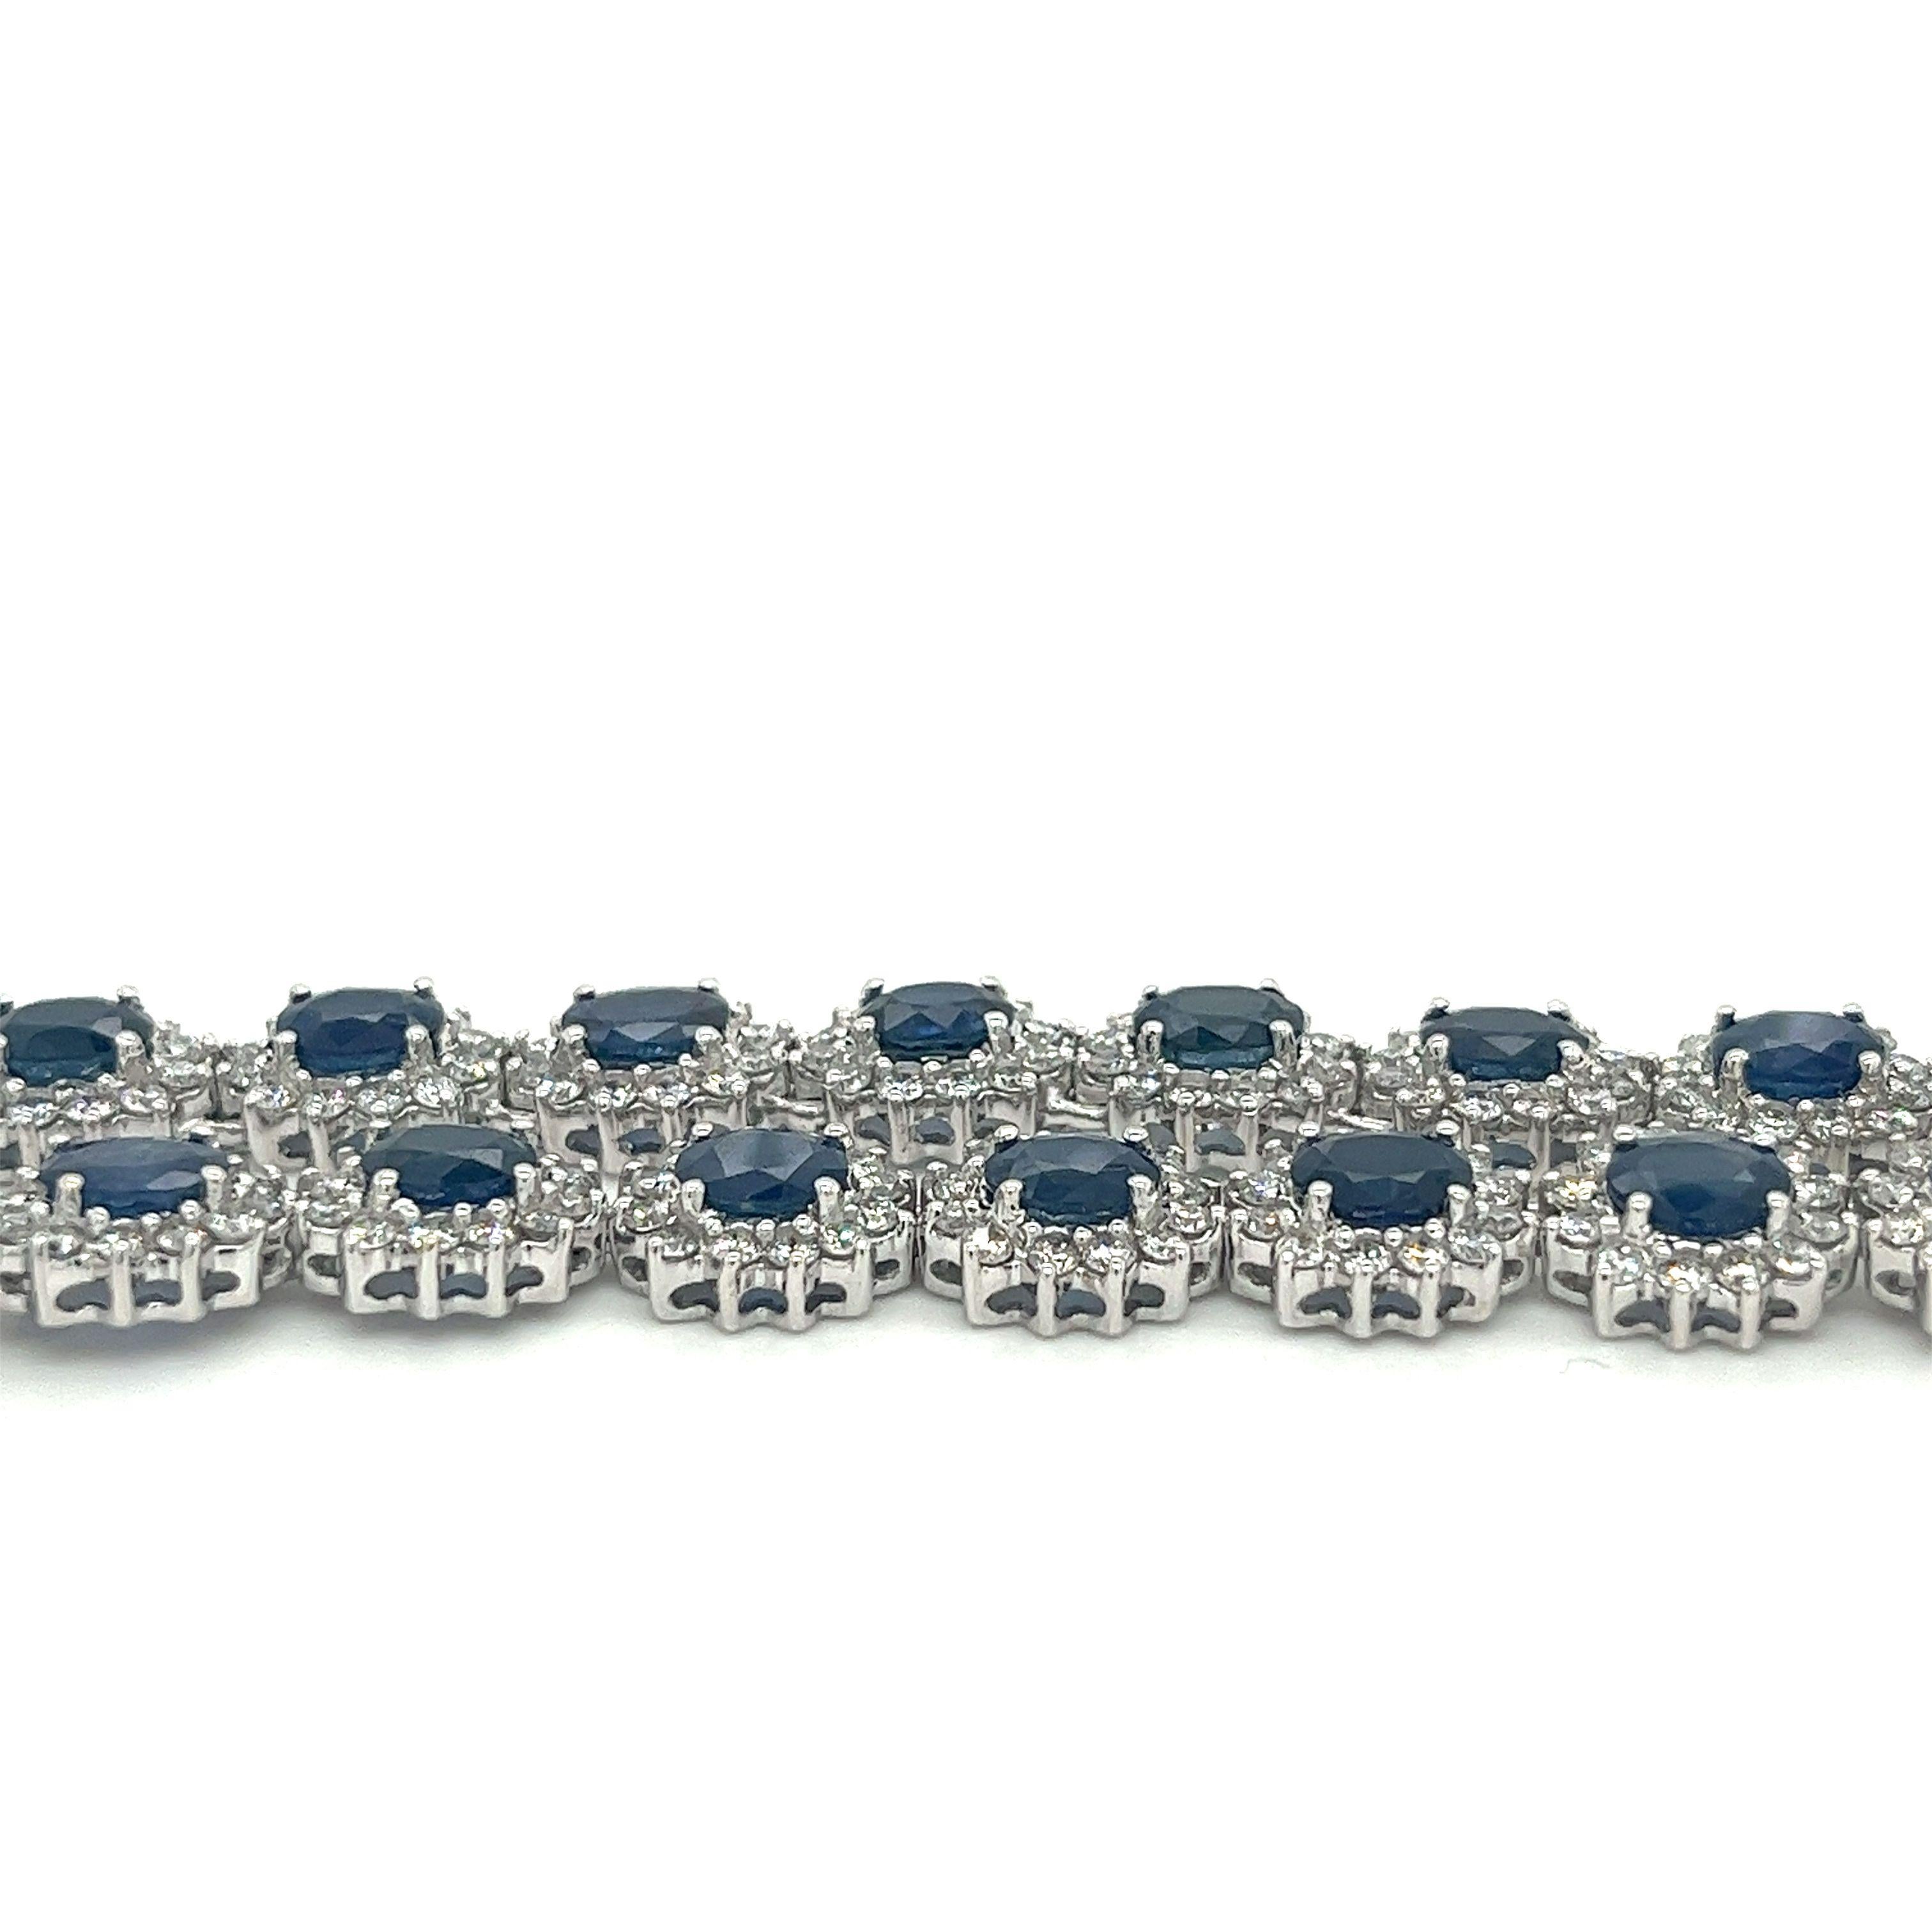 36 Carat Oval Cut Blue Sapphire & Diamond Halo Choker Necklace in 18k White Gold For Sale 2